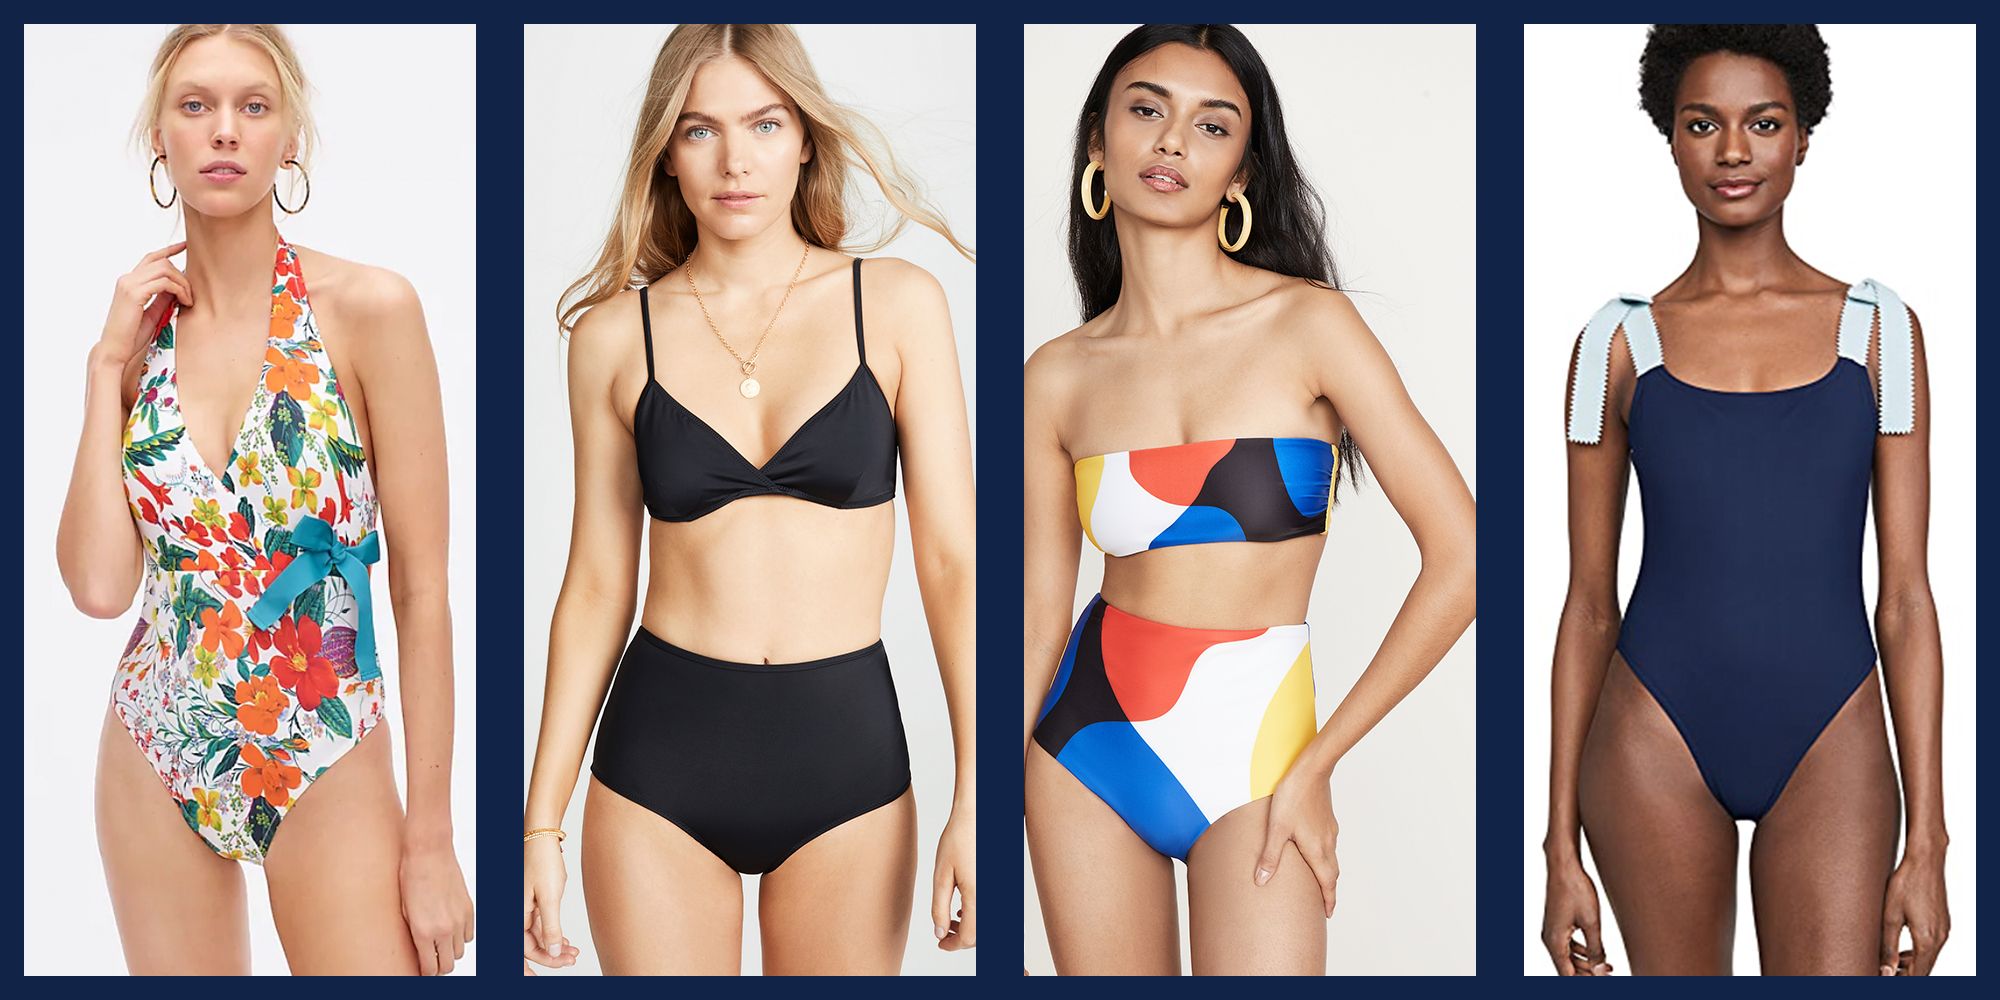 27 Stylish and Fancy Swimsuits for This Summer - Fancy Ideas about